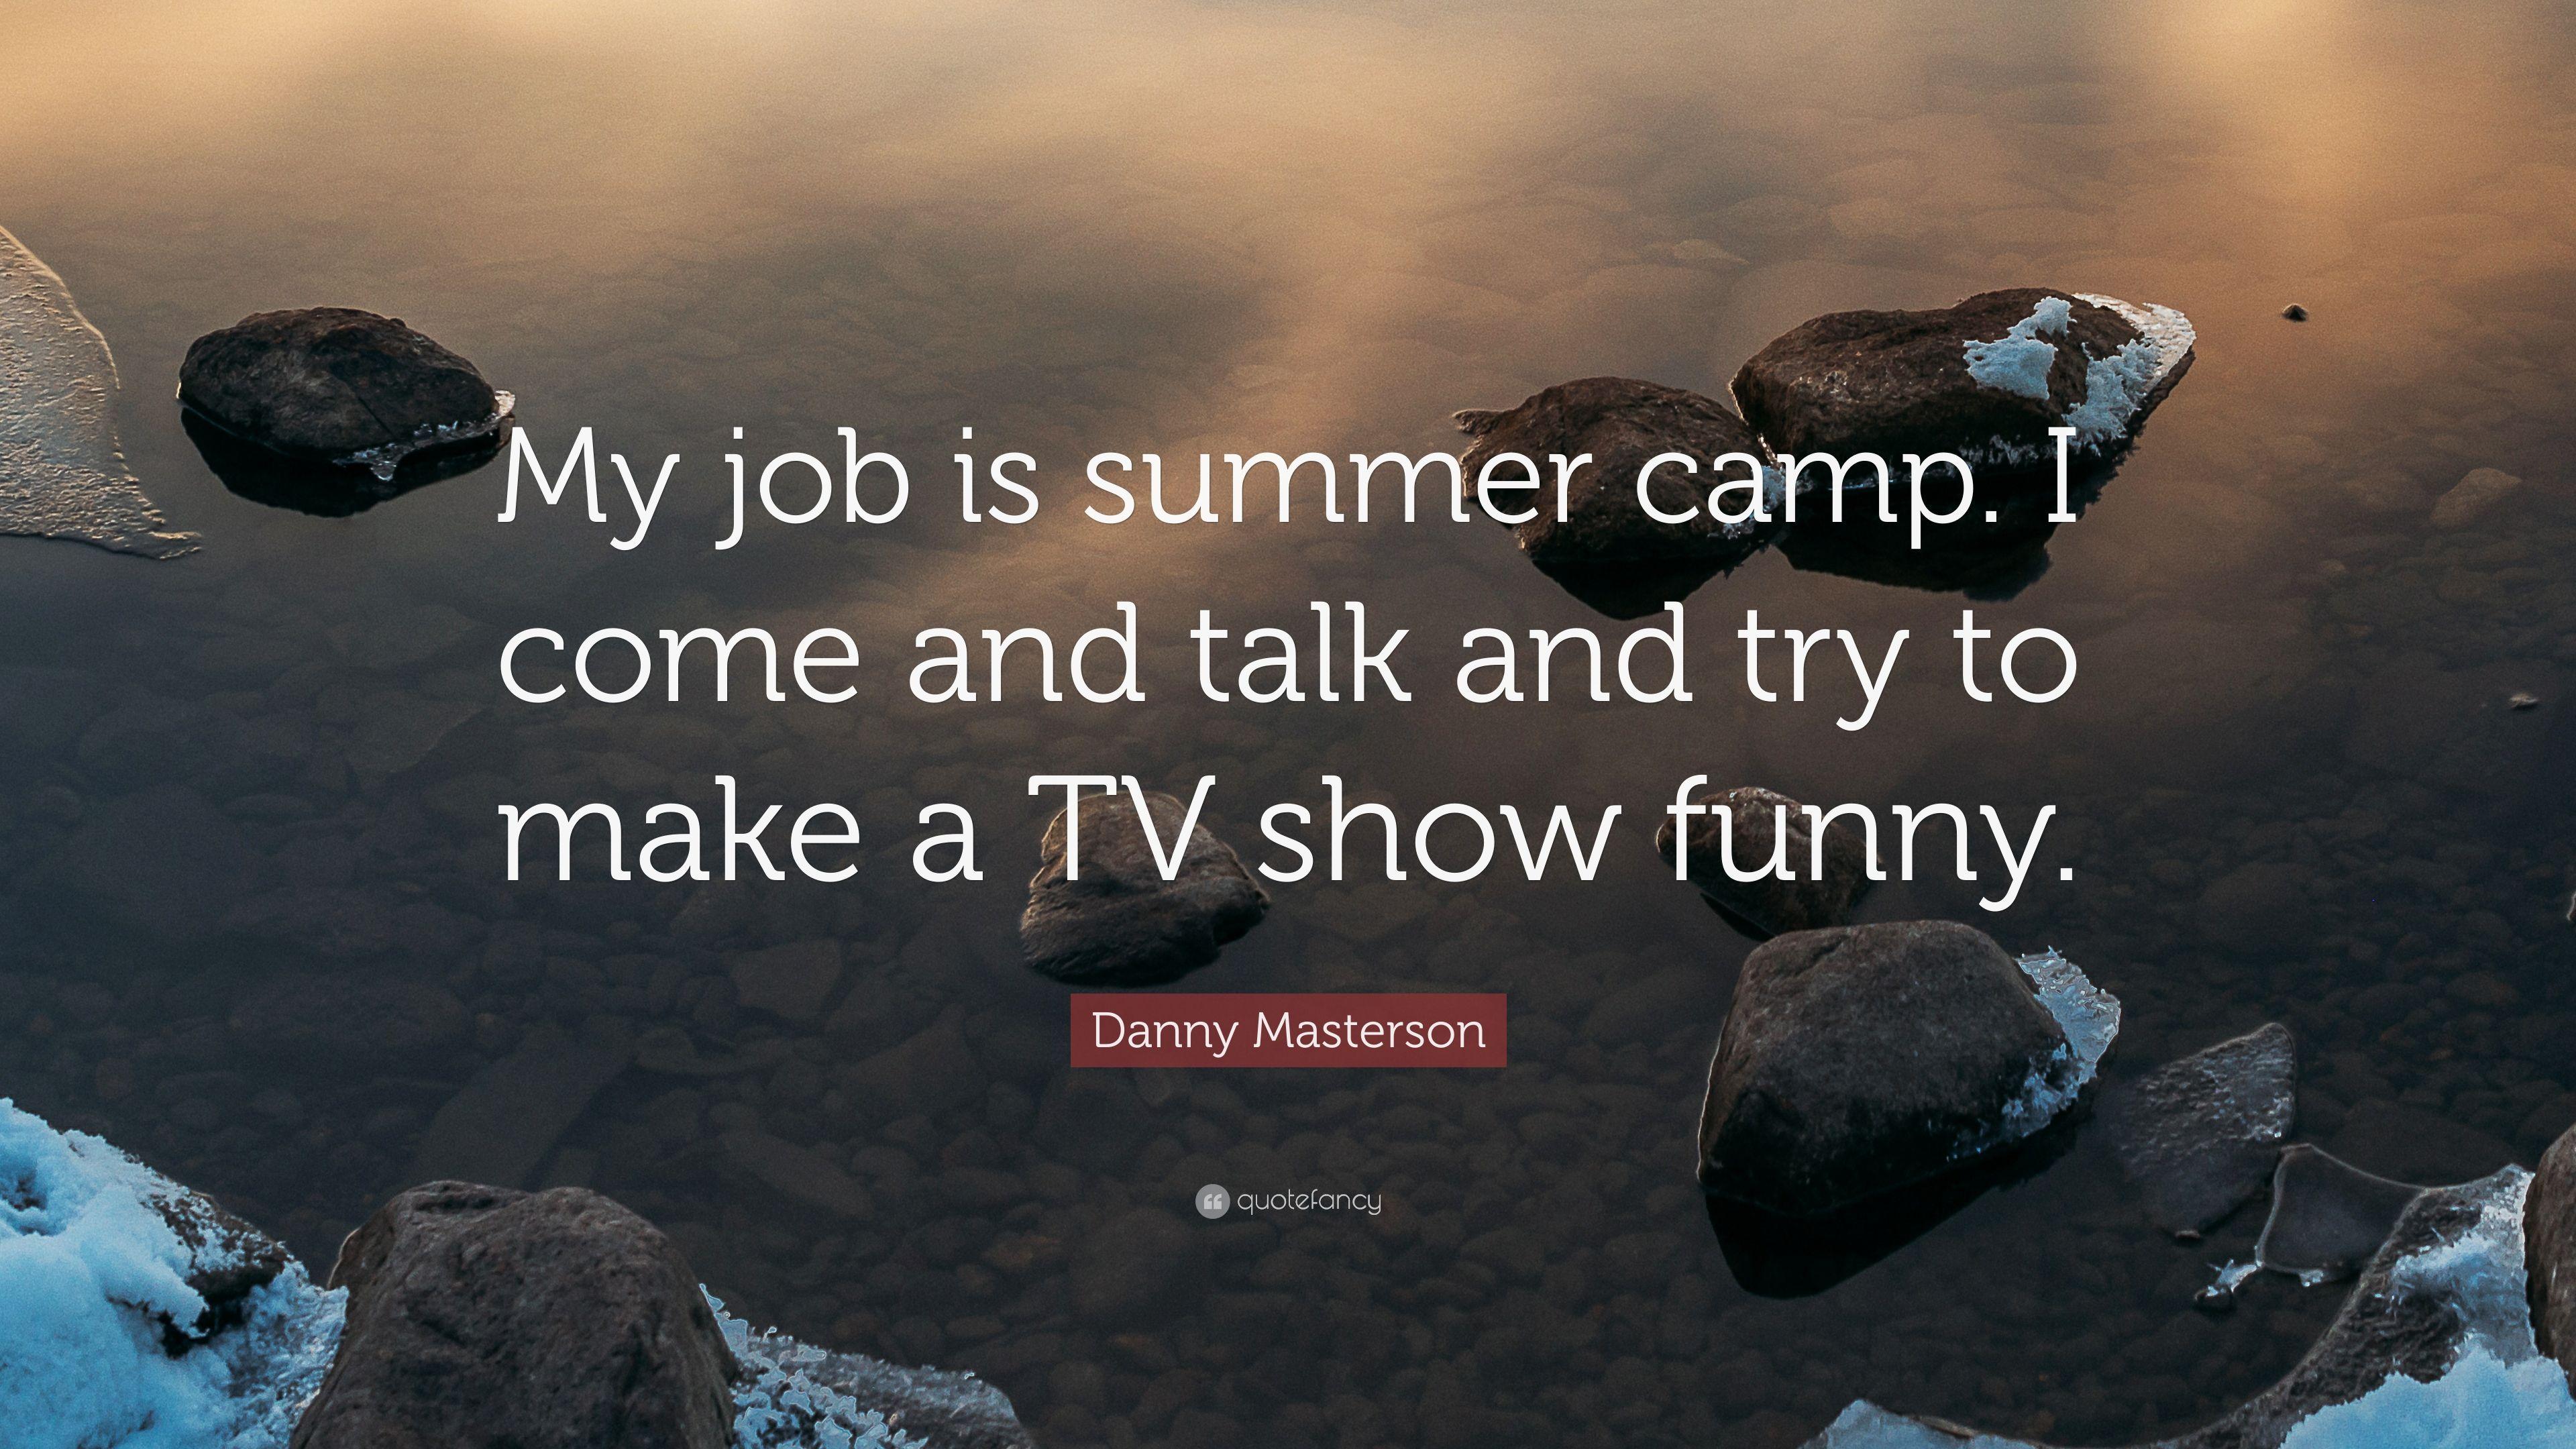 Danny Masterson Quote: "My job is summer camp. 